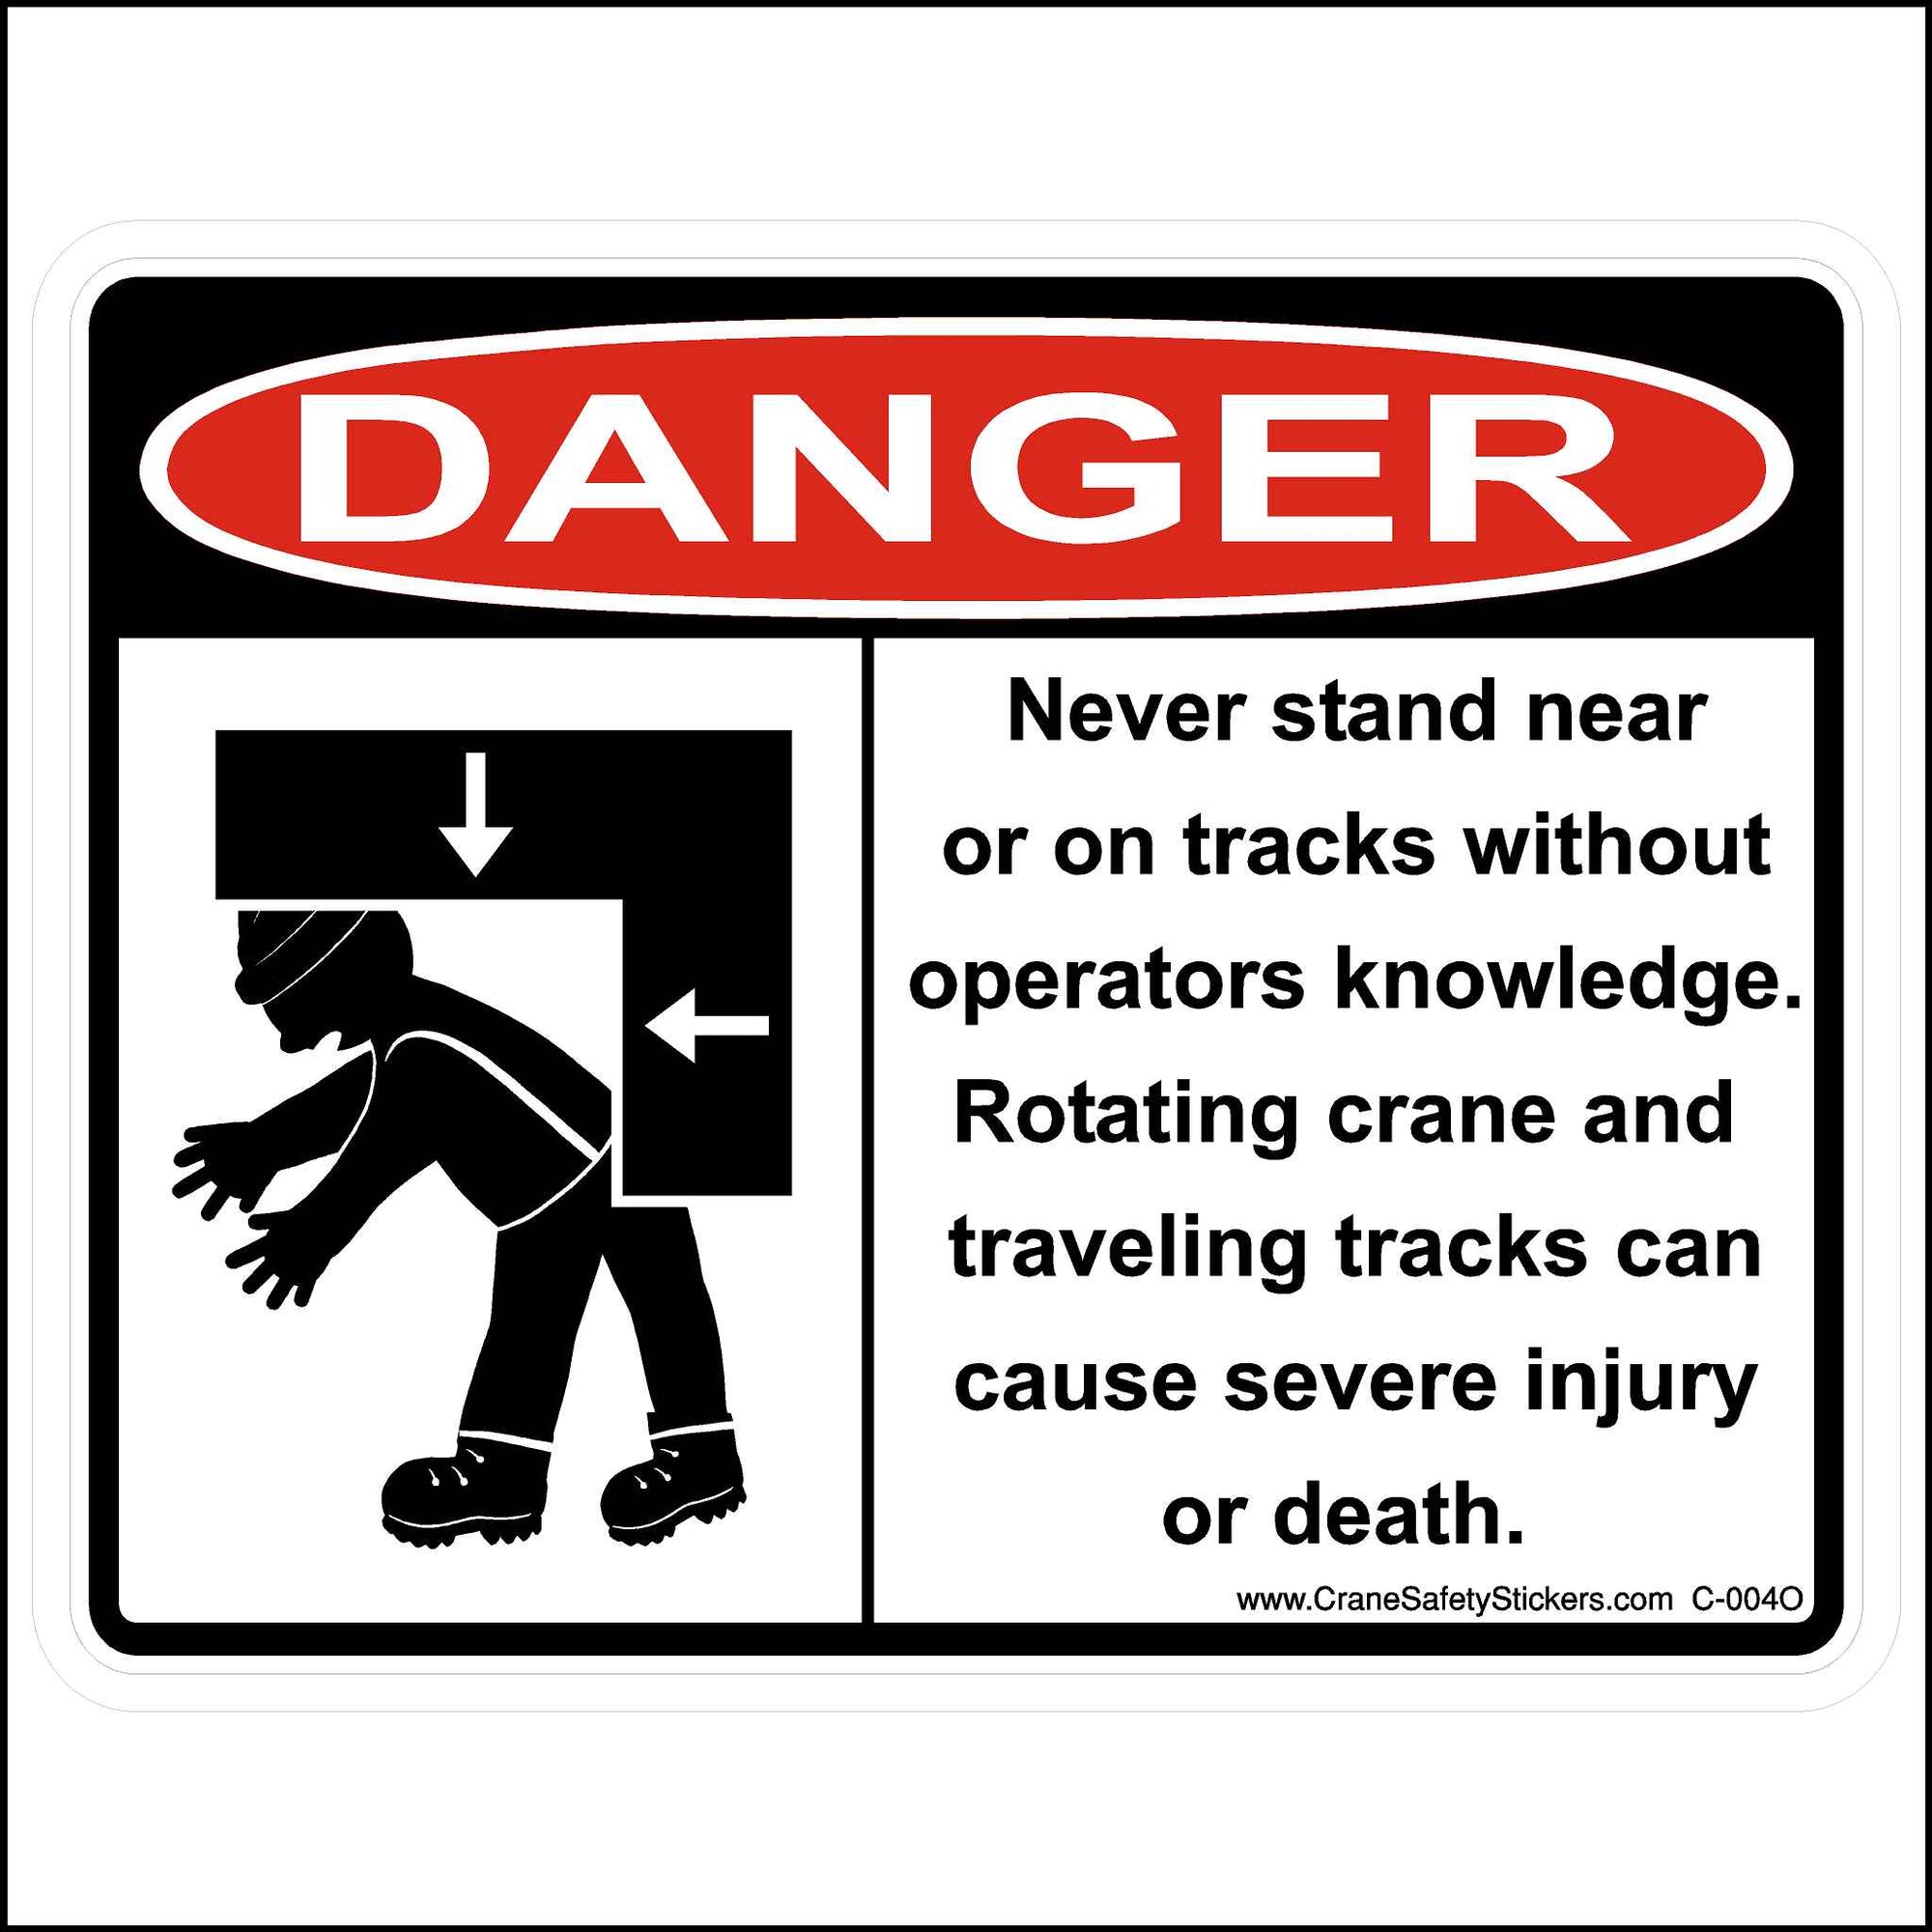 OSHA Crush Hazard Safety Decal. Never stand near or on tracks without operators knowledge. rotating crane and tracks can cause sever injury or death.